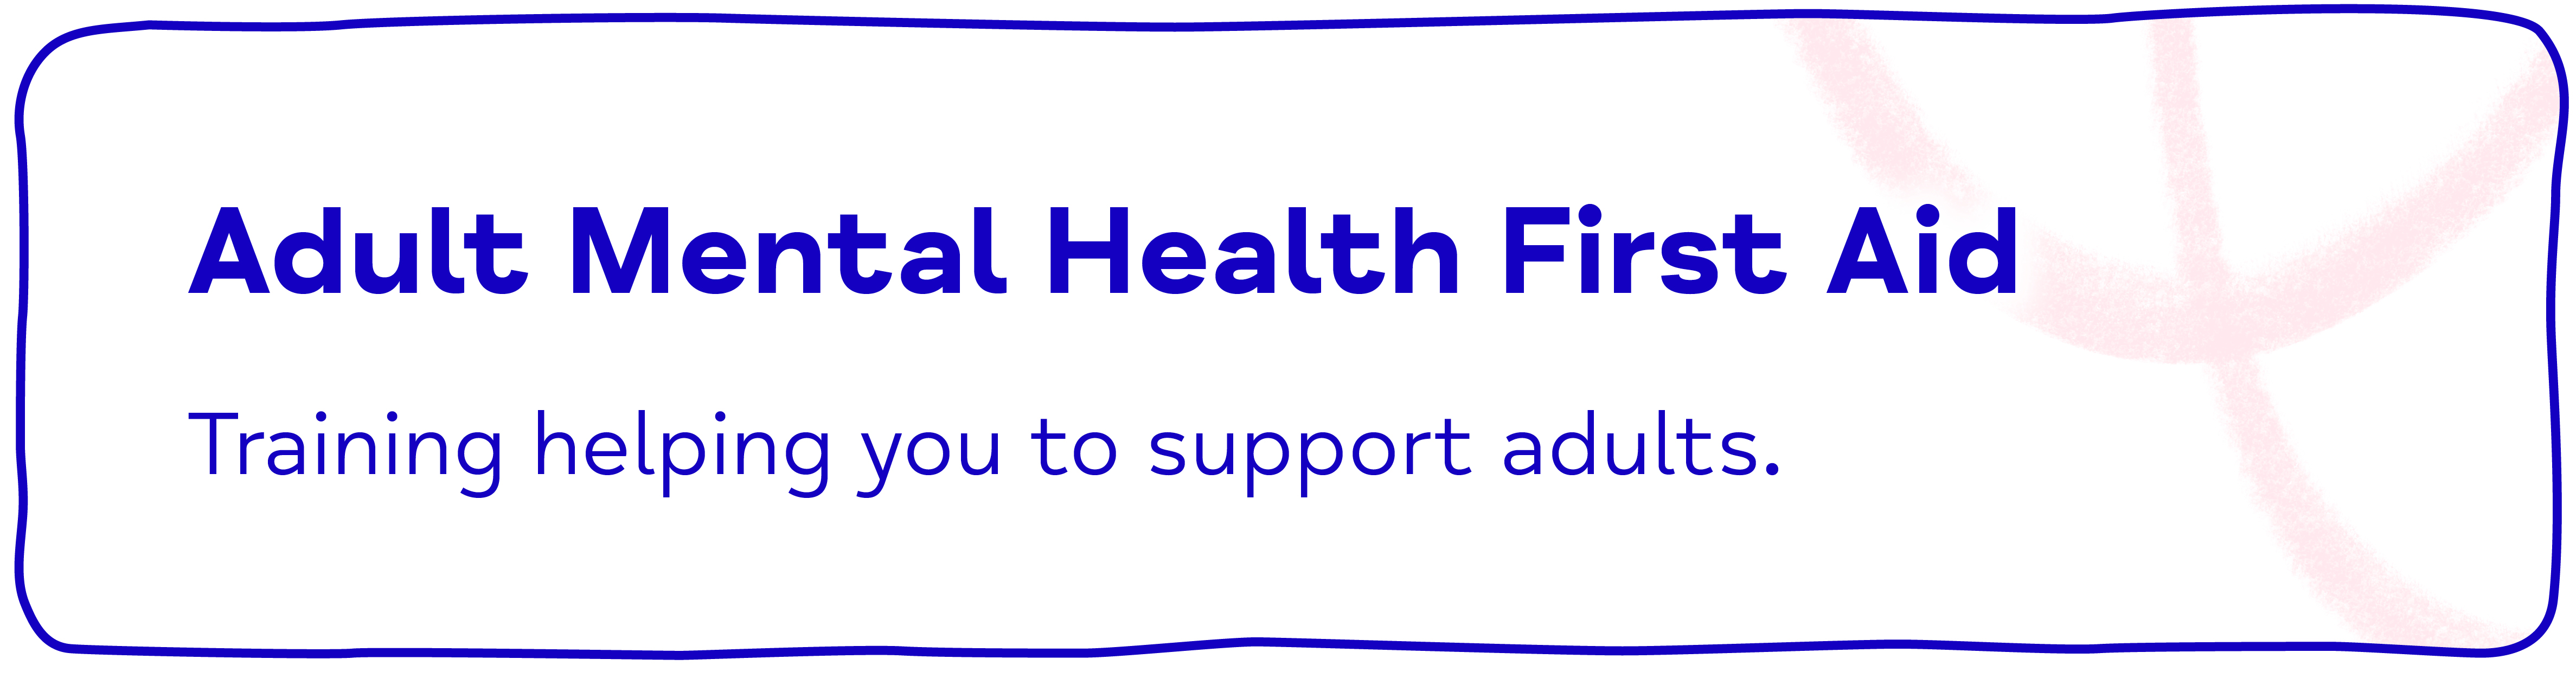 Adult Mental Health First Aid. Training helping you to support adults.